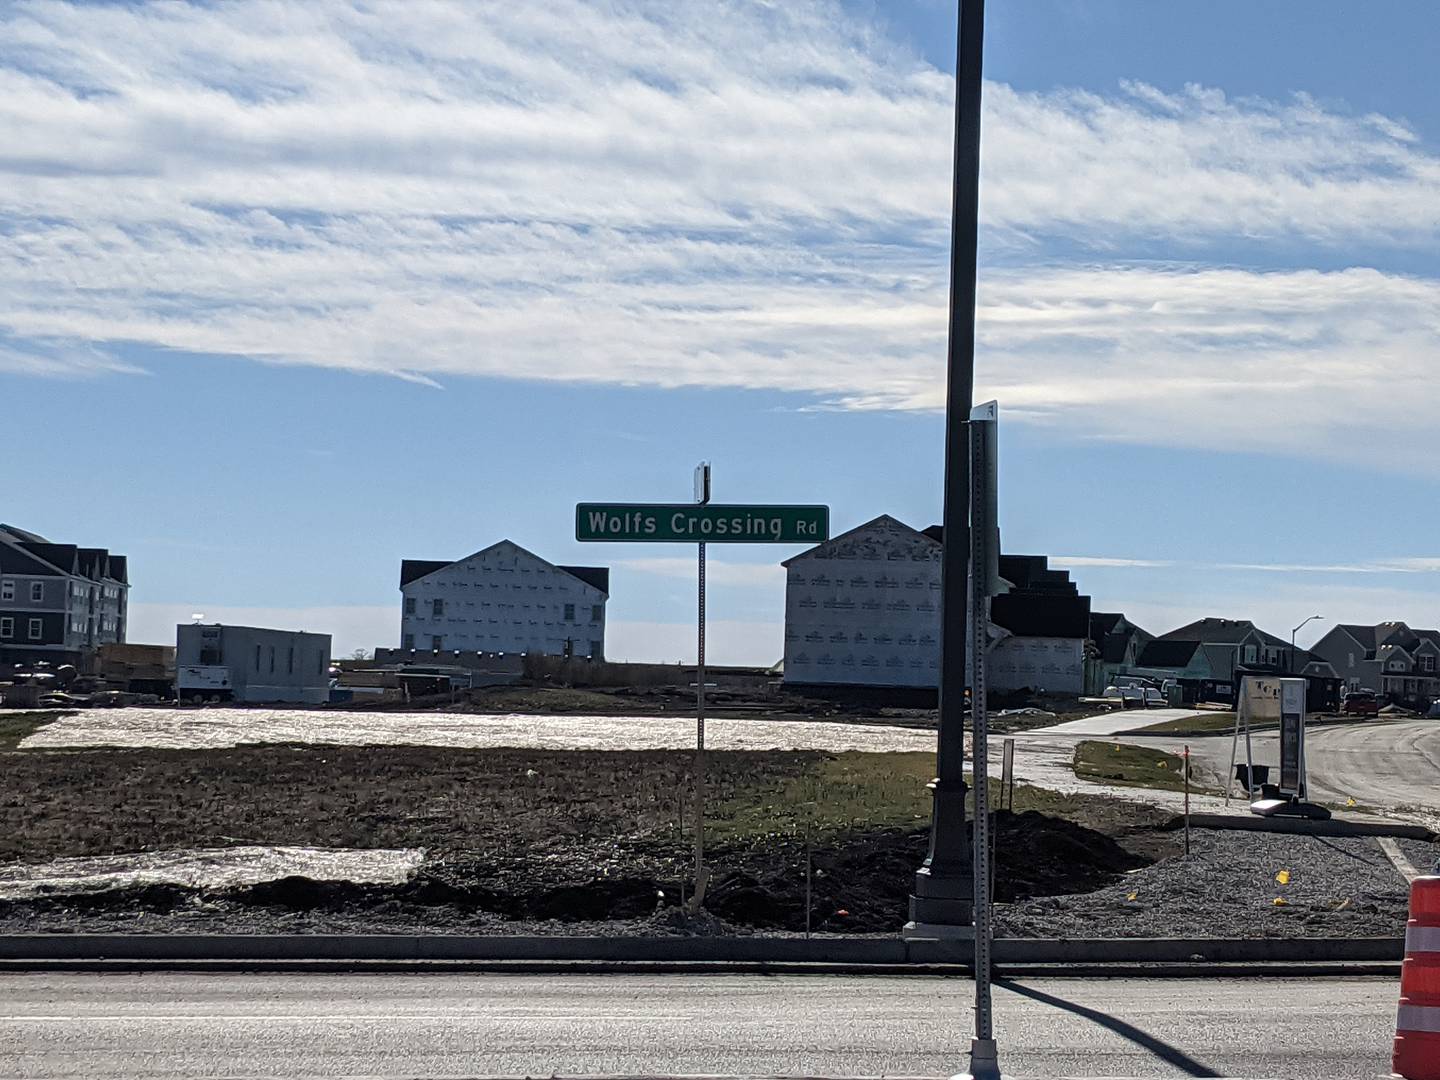 The Emblem Oswego housing development is under construction near where the  Oswego Fire Protection District's fifth fire station plans to locate.